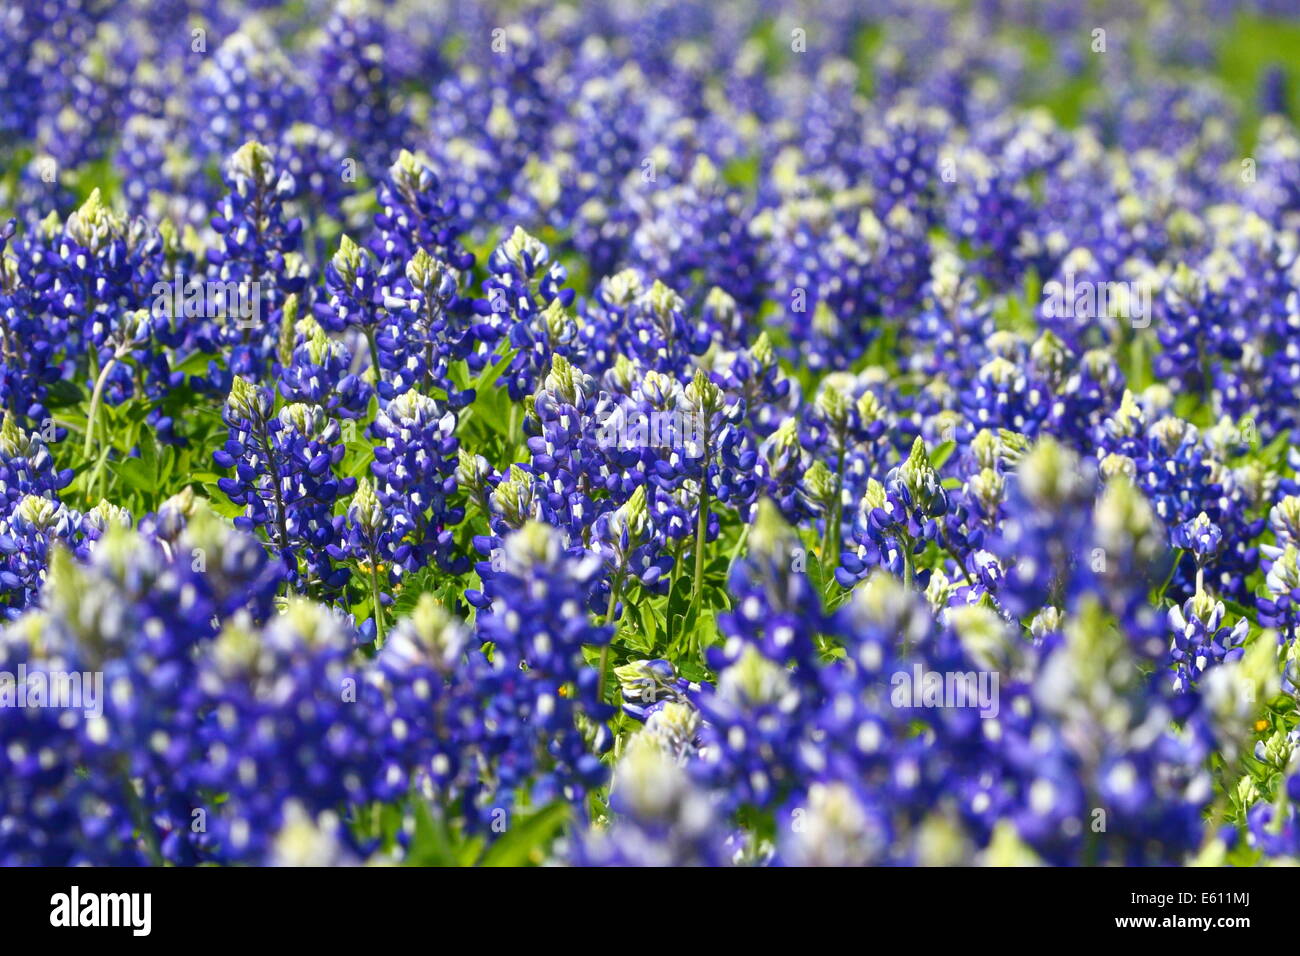 A field full of Texas Bluebonnet (Lupinus texensis) in the hill country area of Texas, USA. Stock Photo